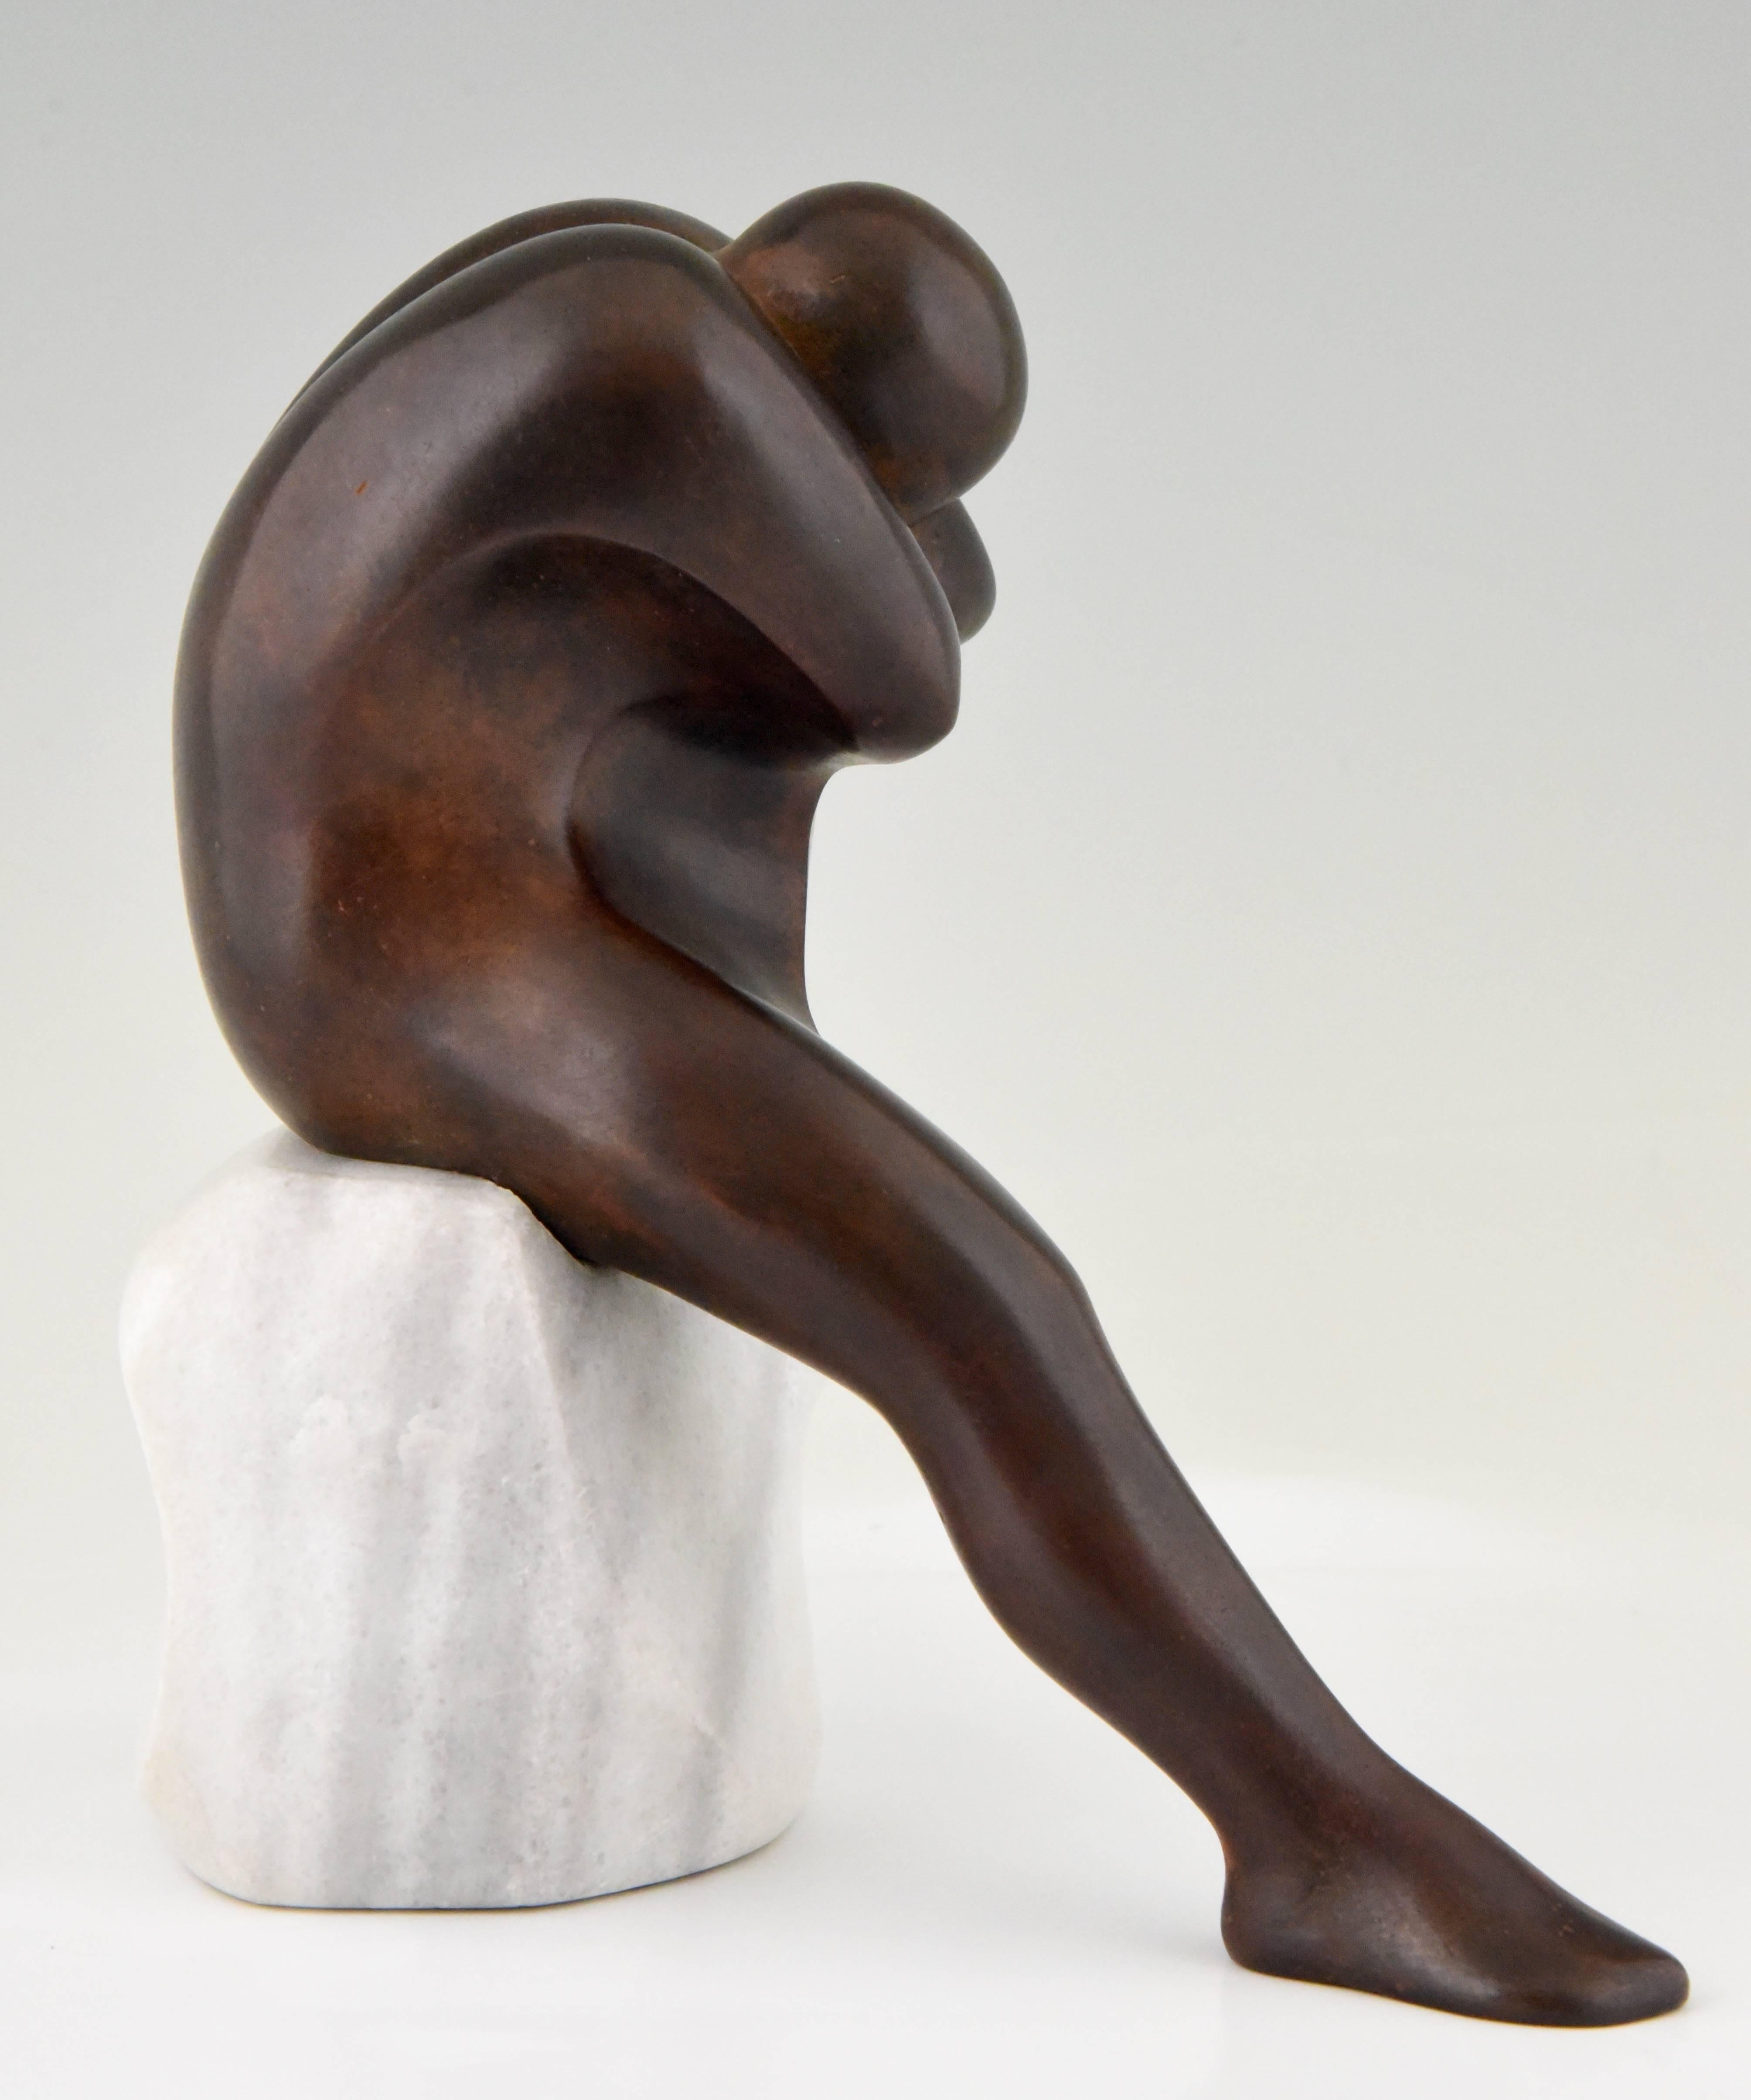 Italian L' Uomo, Bronze Sculpture of a Sitting Man Marble Base by Selvino Cavezza, 1985